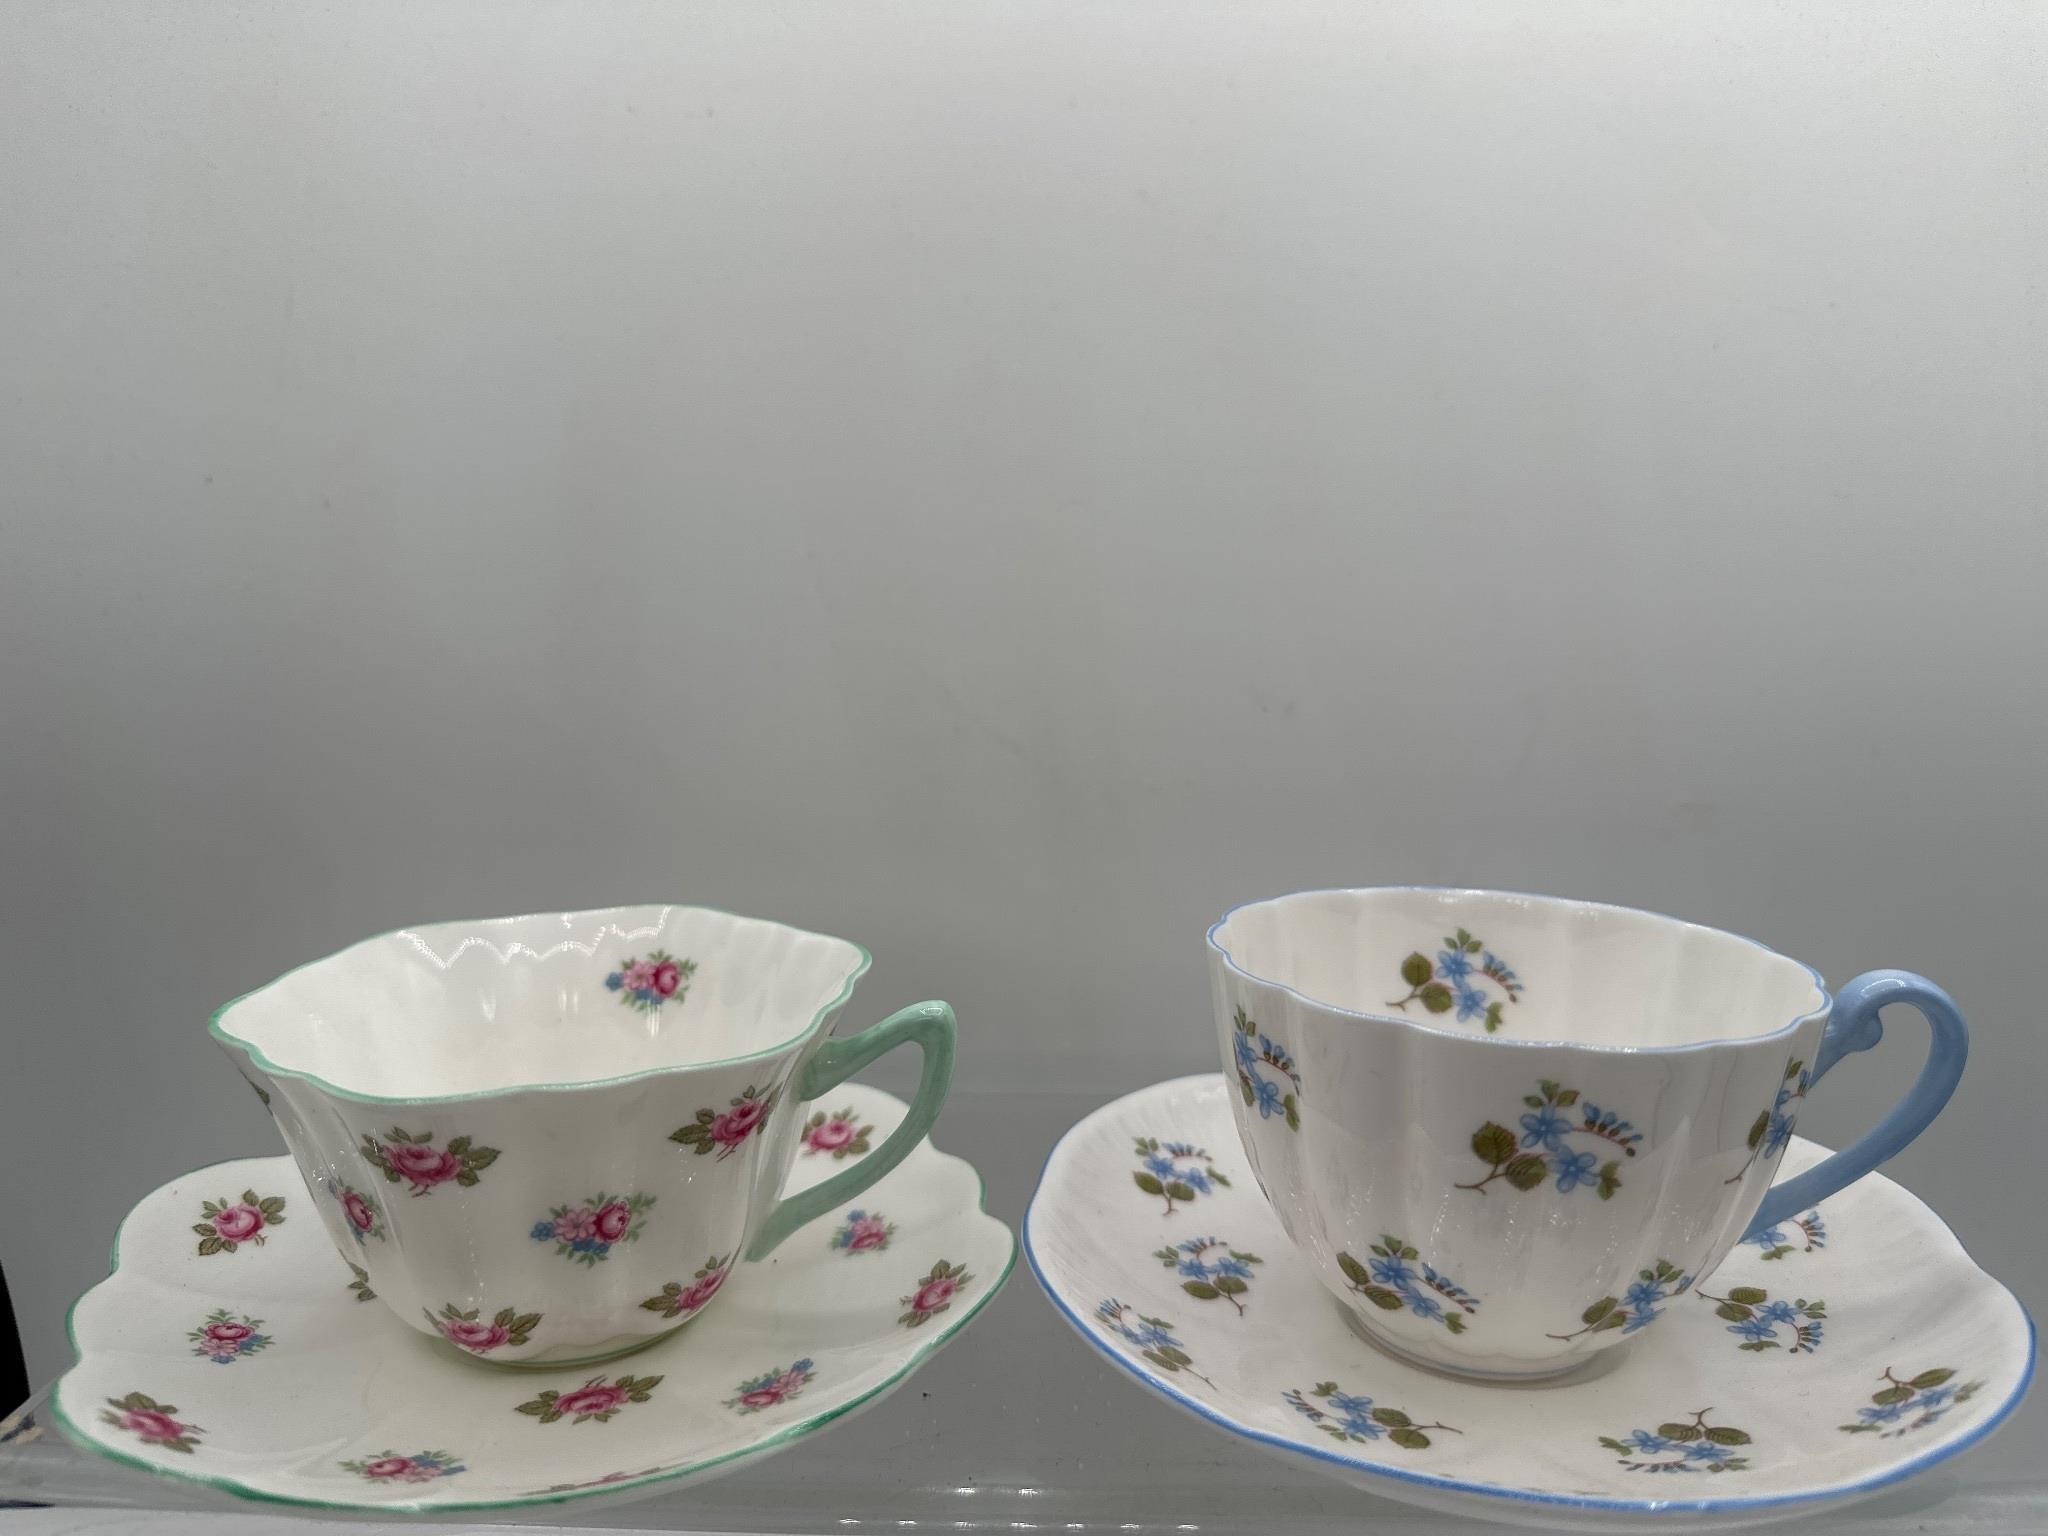 Shelley porcelain cups and saucers